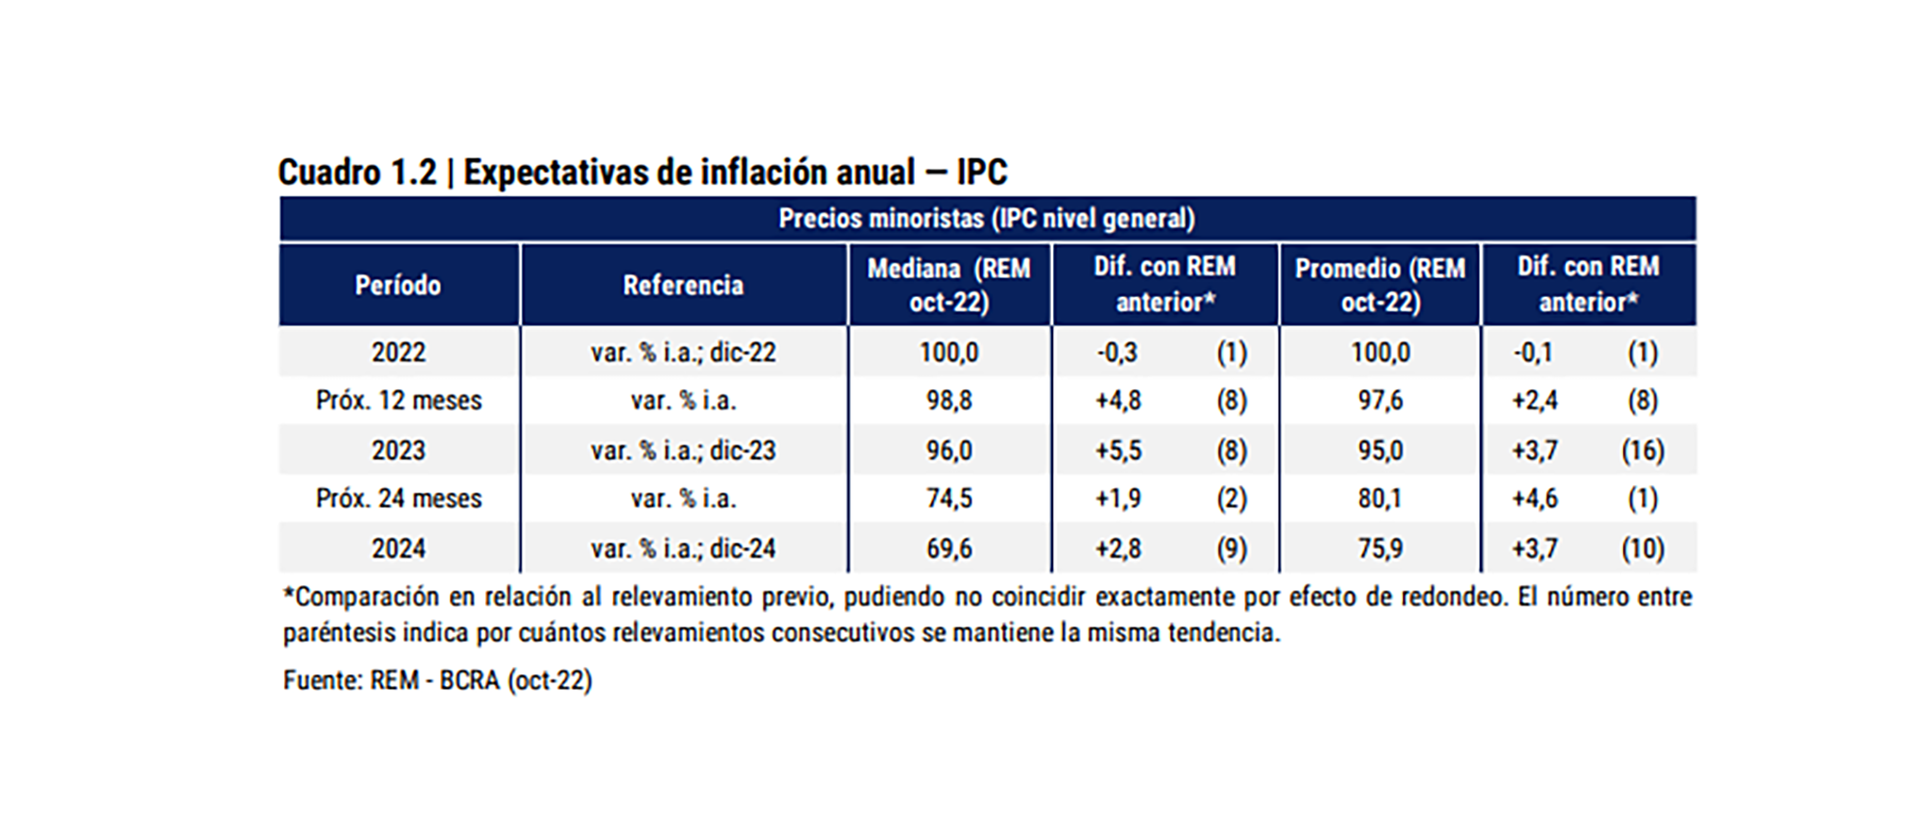 Inflation expectations of analysts surveyed by BCRA